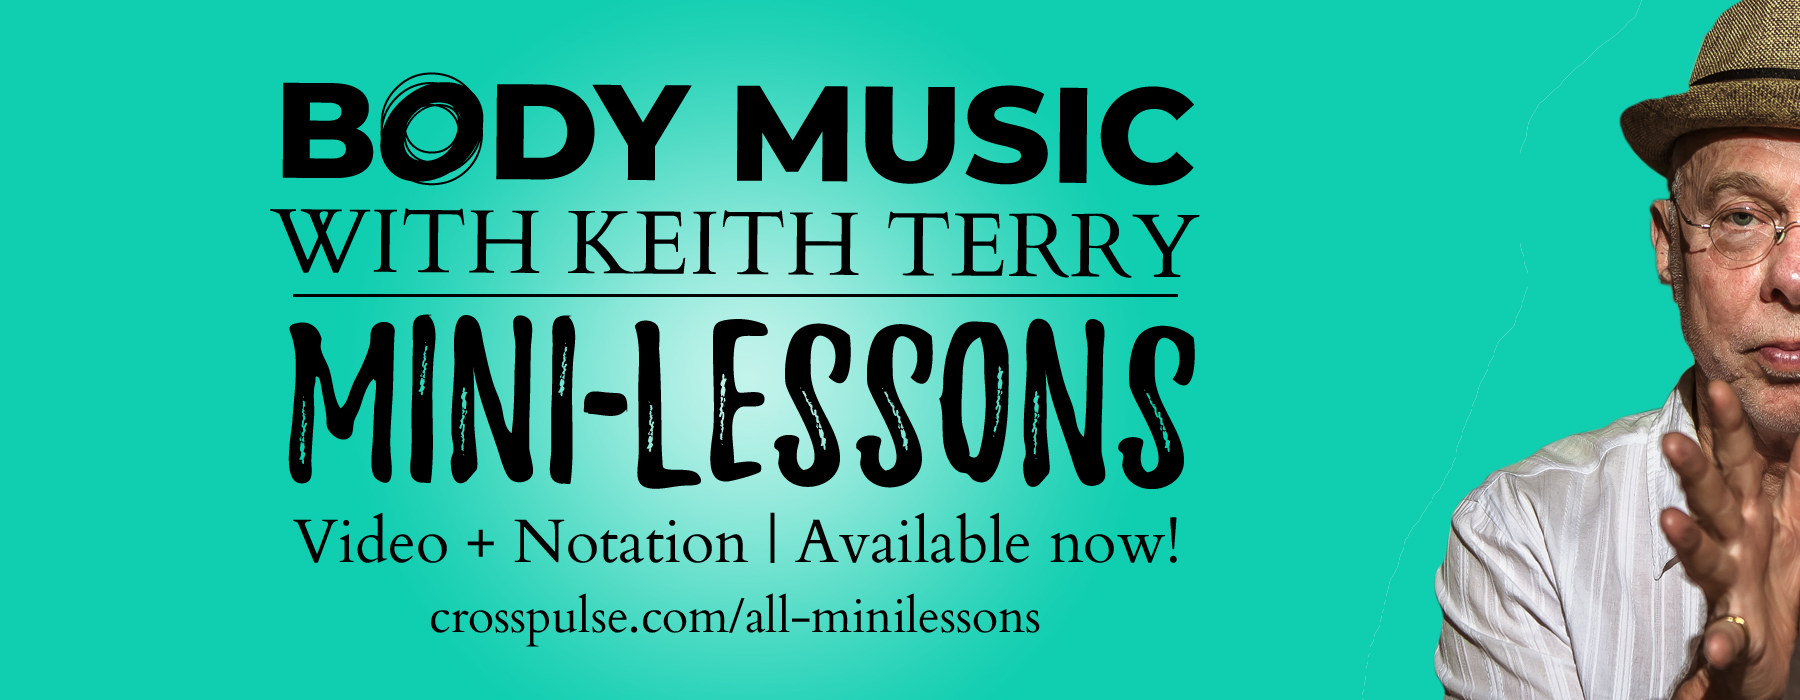 Body Music Mini-Lessons with Keith Terry